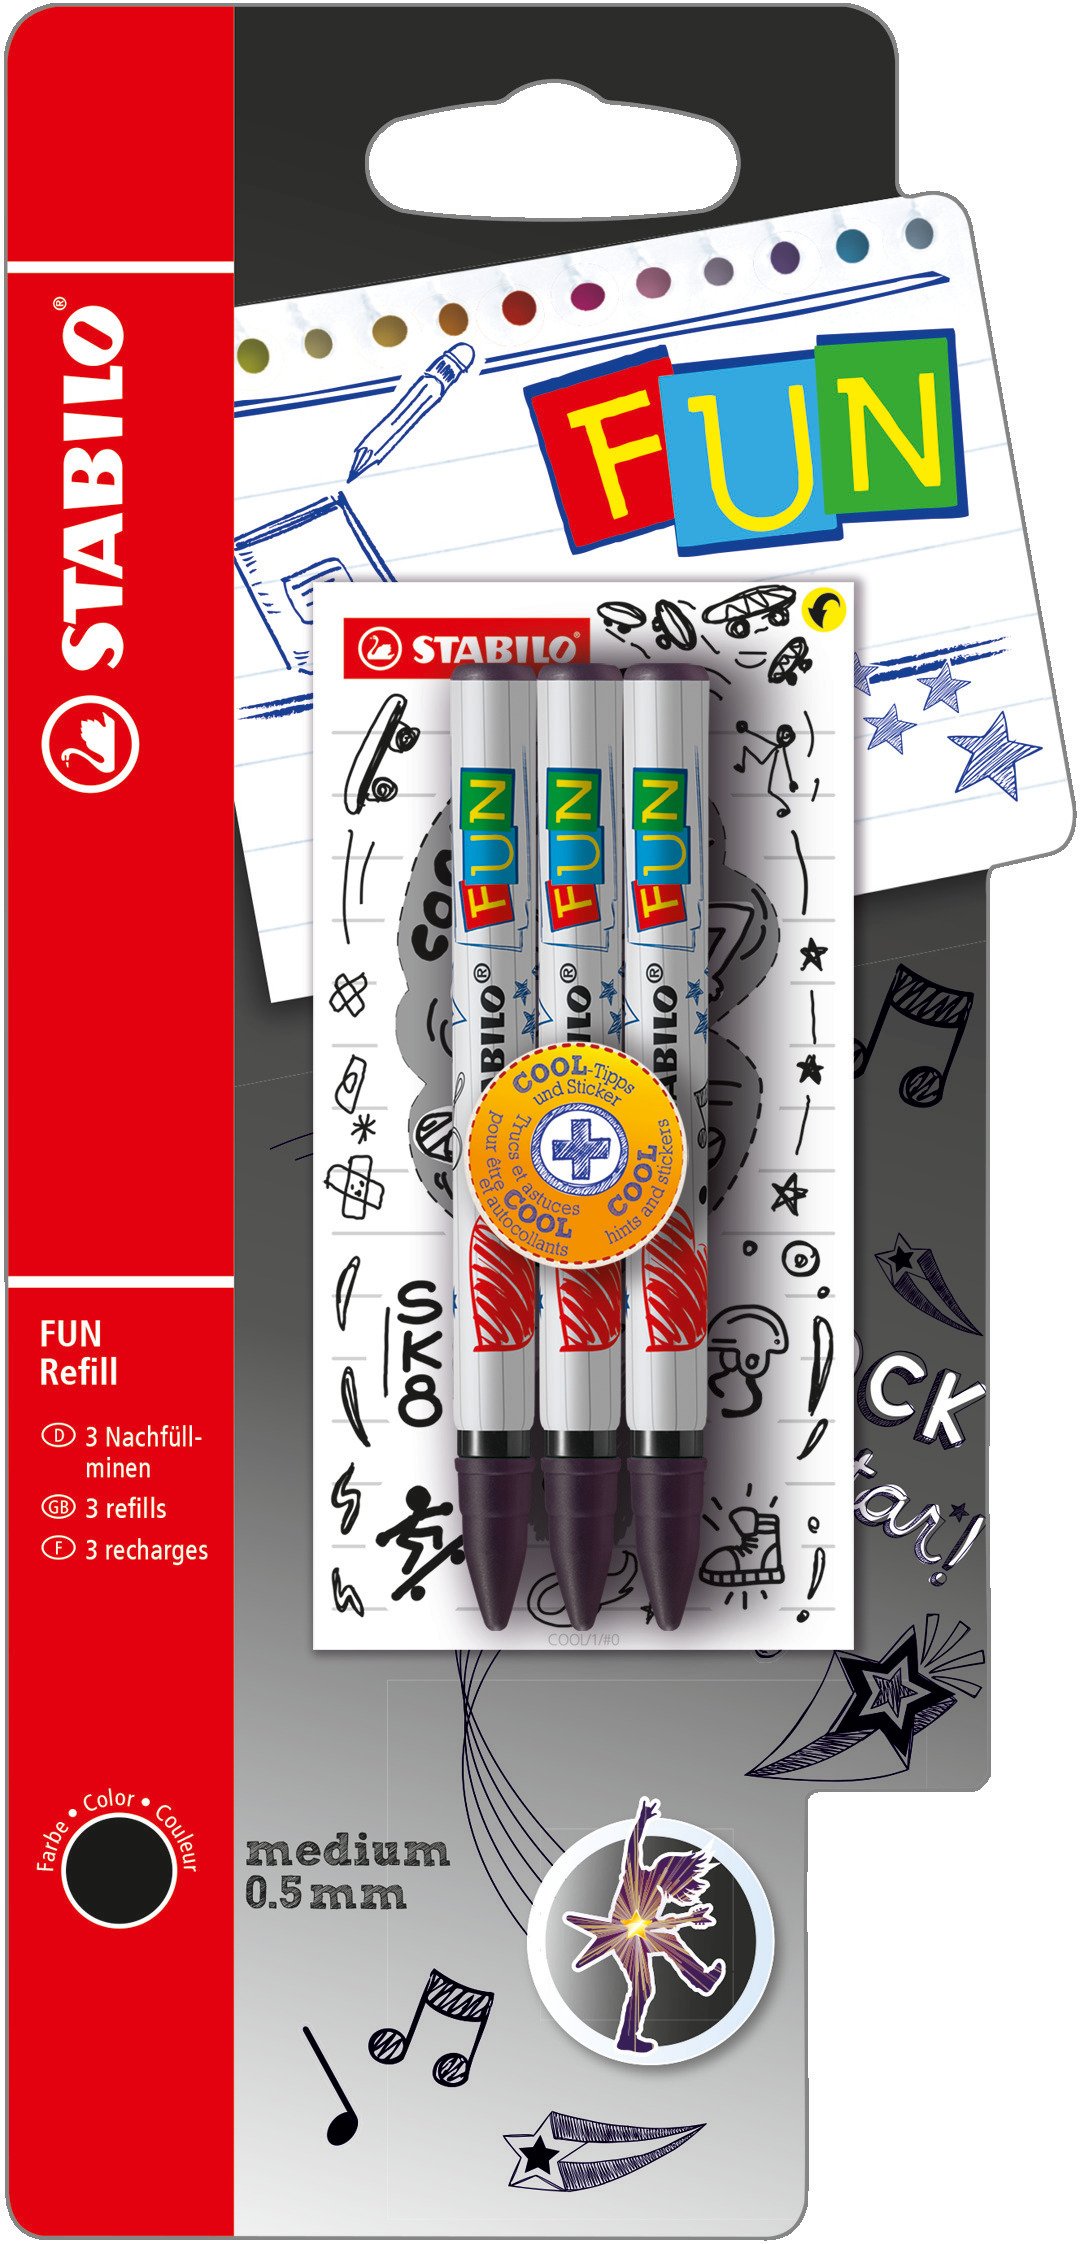 Recharges STABILO FUN refill